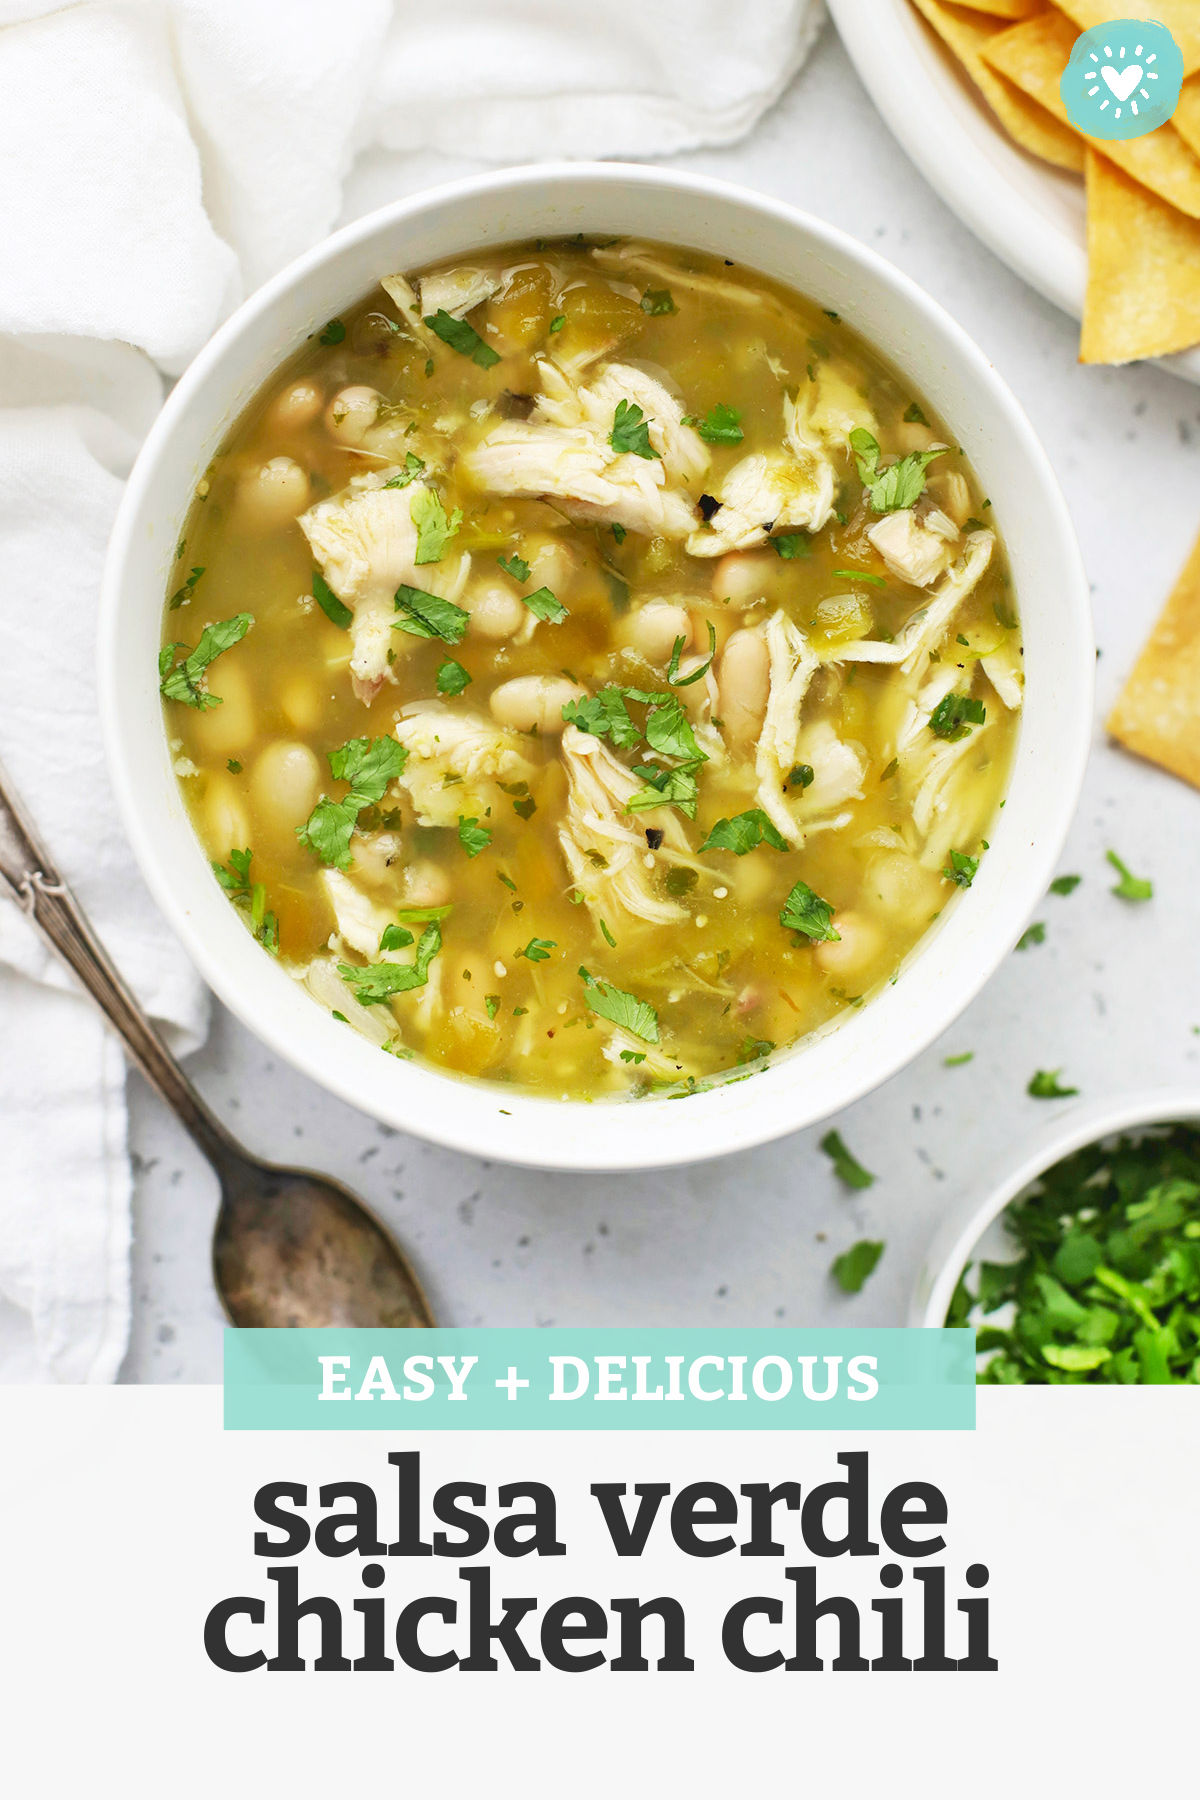 Salsa Verde Chicken Chili - This might be the EASIEST chili recipe ever! Just 7 ingredients + 15 minutes and you're ready to enjoy this lighter take on chili night. (Gluten-Free + Easy!) // White Chicken Chili // Healthy Chili Recipe // Chicken Chili Recipe // Healthy Soup